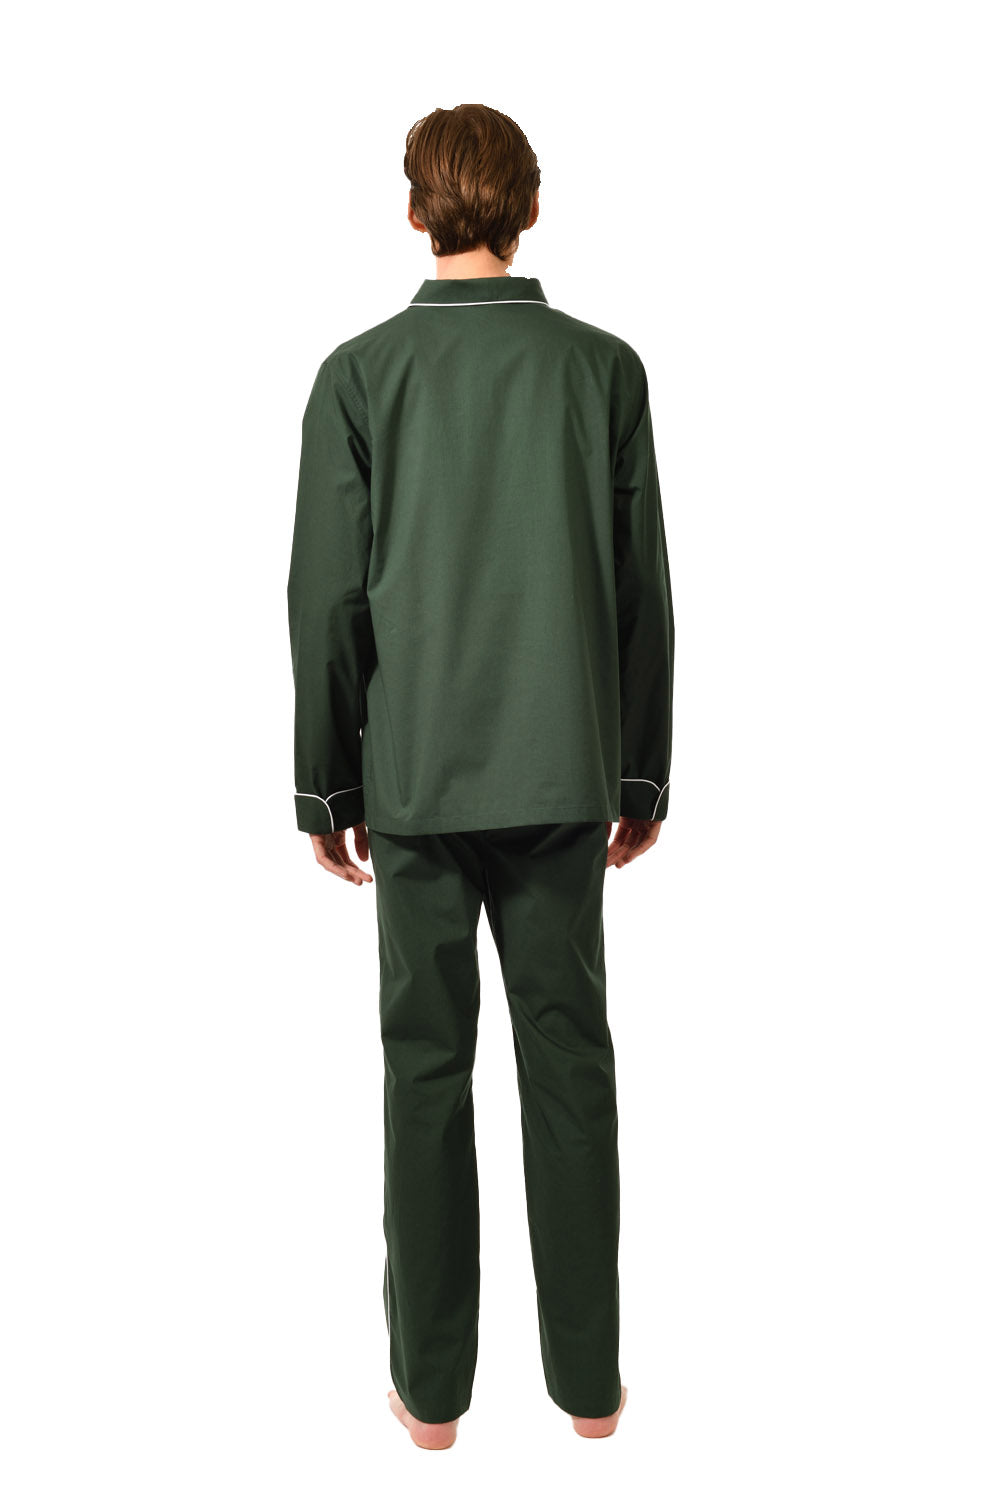 The Waldorf in green cotton broadcloth